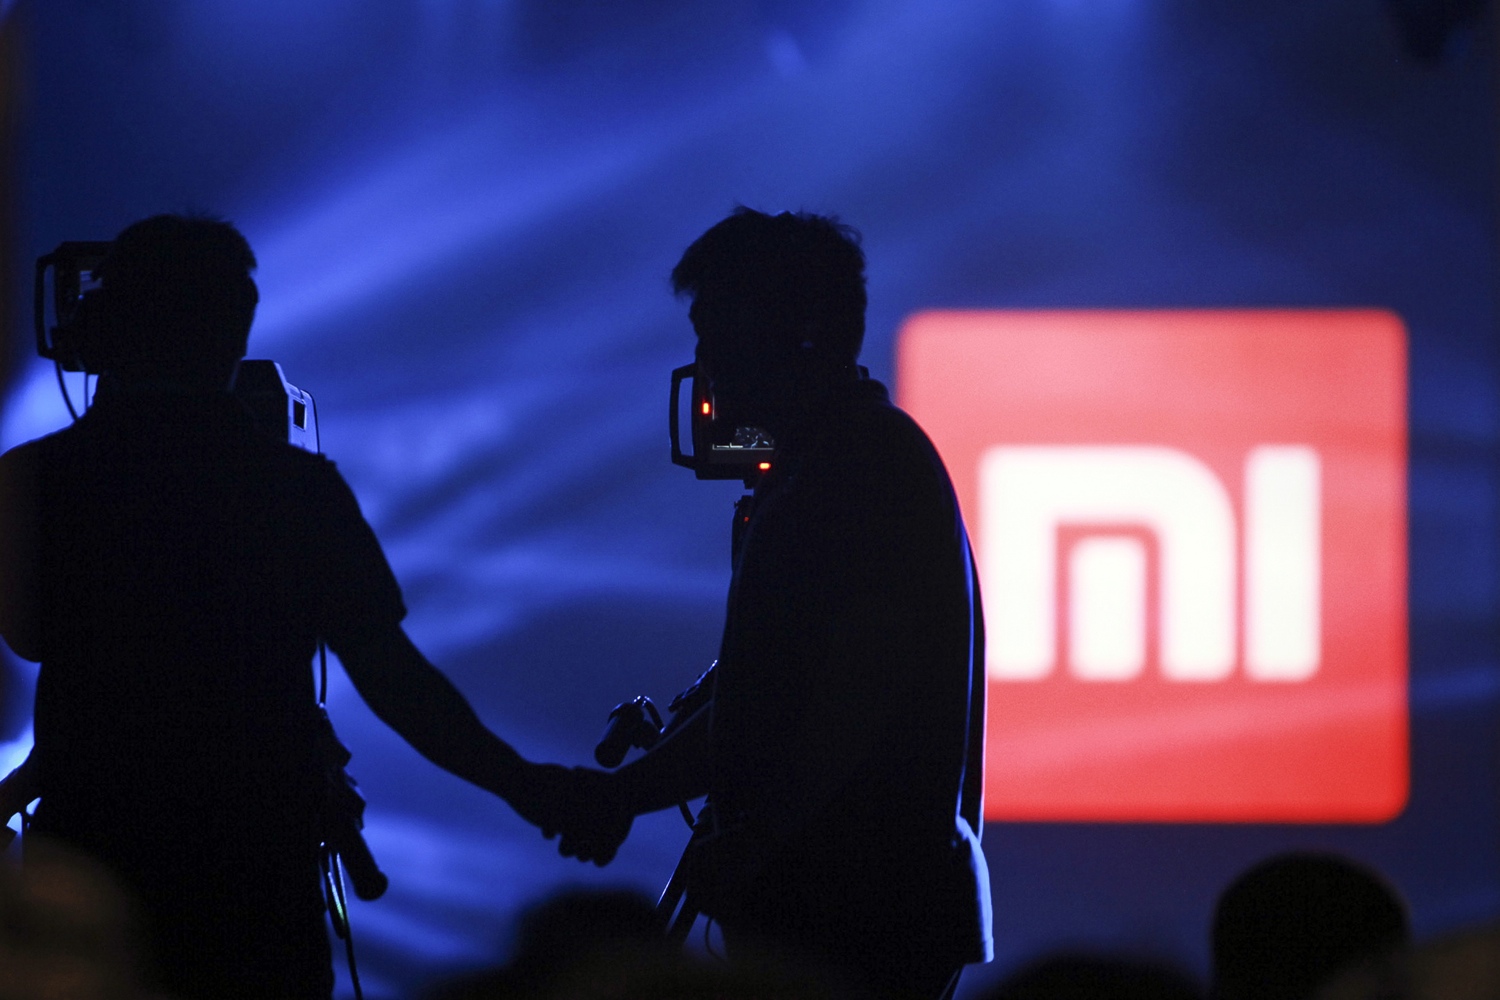 A logo of Xiaomi is seen at Xiaomi's tablet launch event in Beijing, May 15, 2014. Chinese smartphone maker Xiaomi Tech announced its first tablet at a product launch event in Beijing on Thursday, expanding its product lineup in a potential challenge to Samsung Electronics Co Ltd and Apple Inc. (China Daily / Reuters)